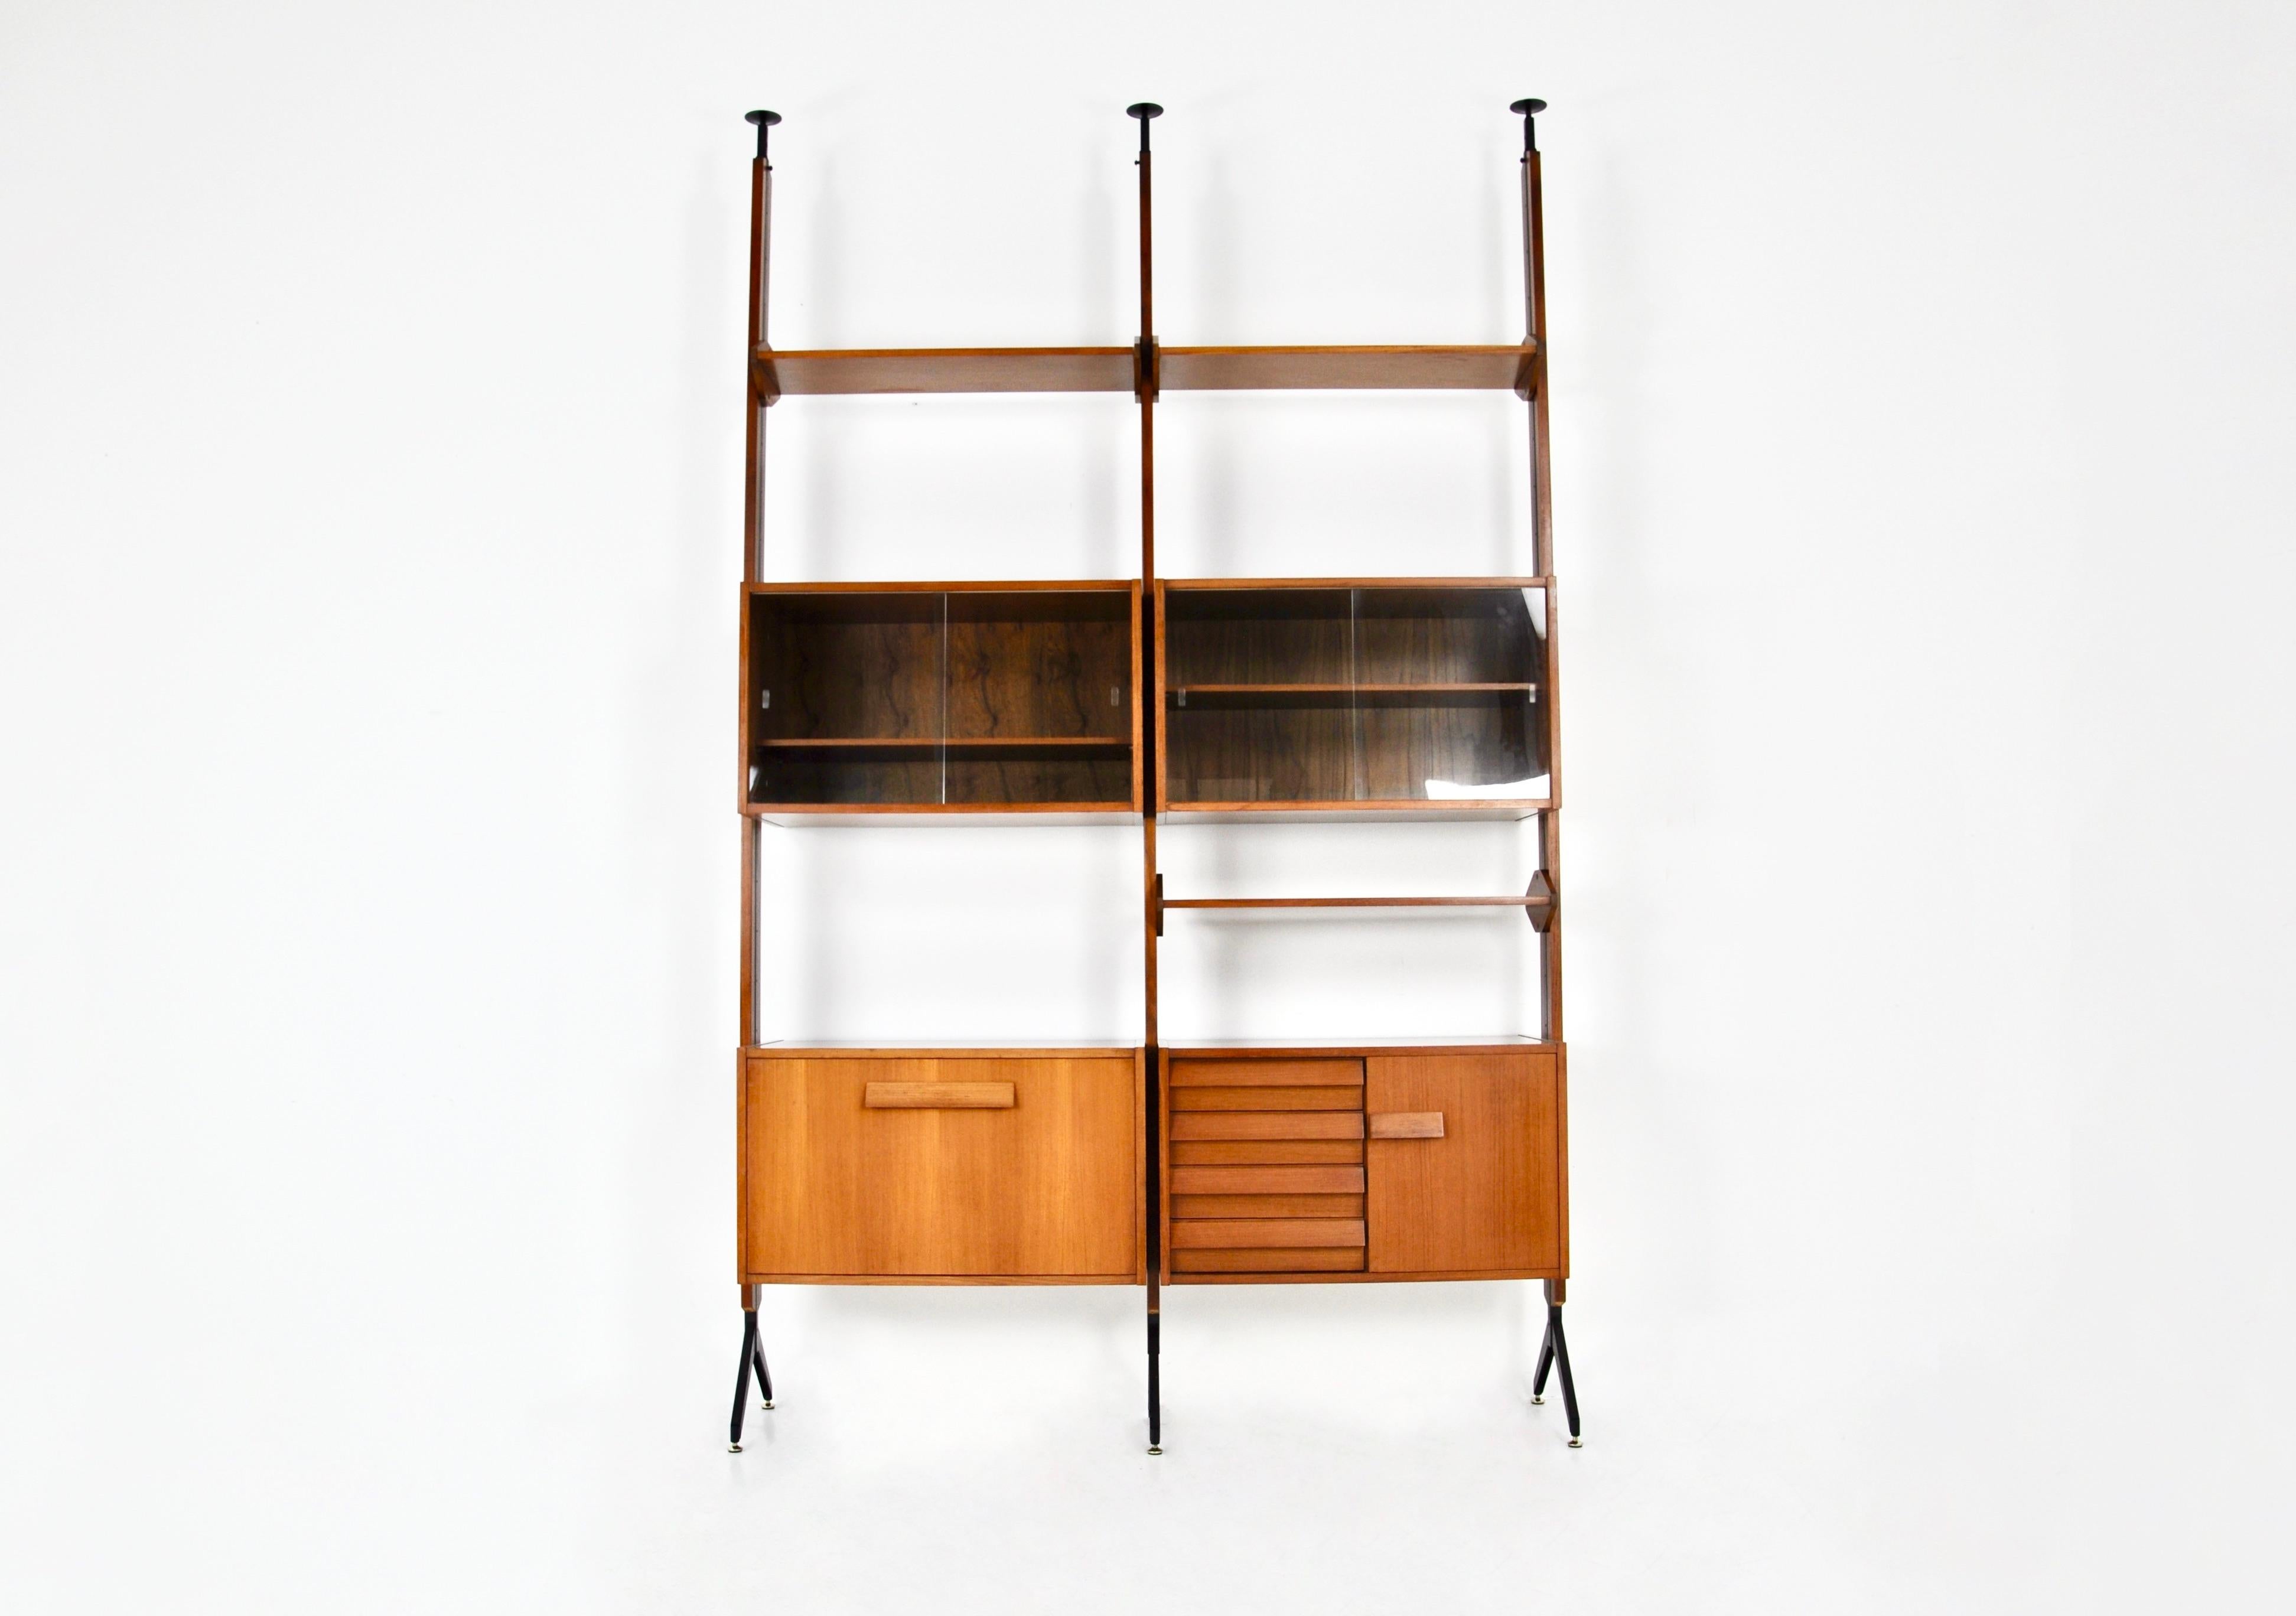 Modular wall unit with 3 shelves, 2 boxes with two sliding glass doors containing one shelf, 1 boxes  with a folding door containing one shelf and 1 boxes with 4 drawers and a door containing one shelf.  Adjustable height: height minimum: 262 cm,